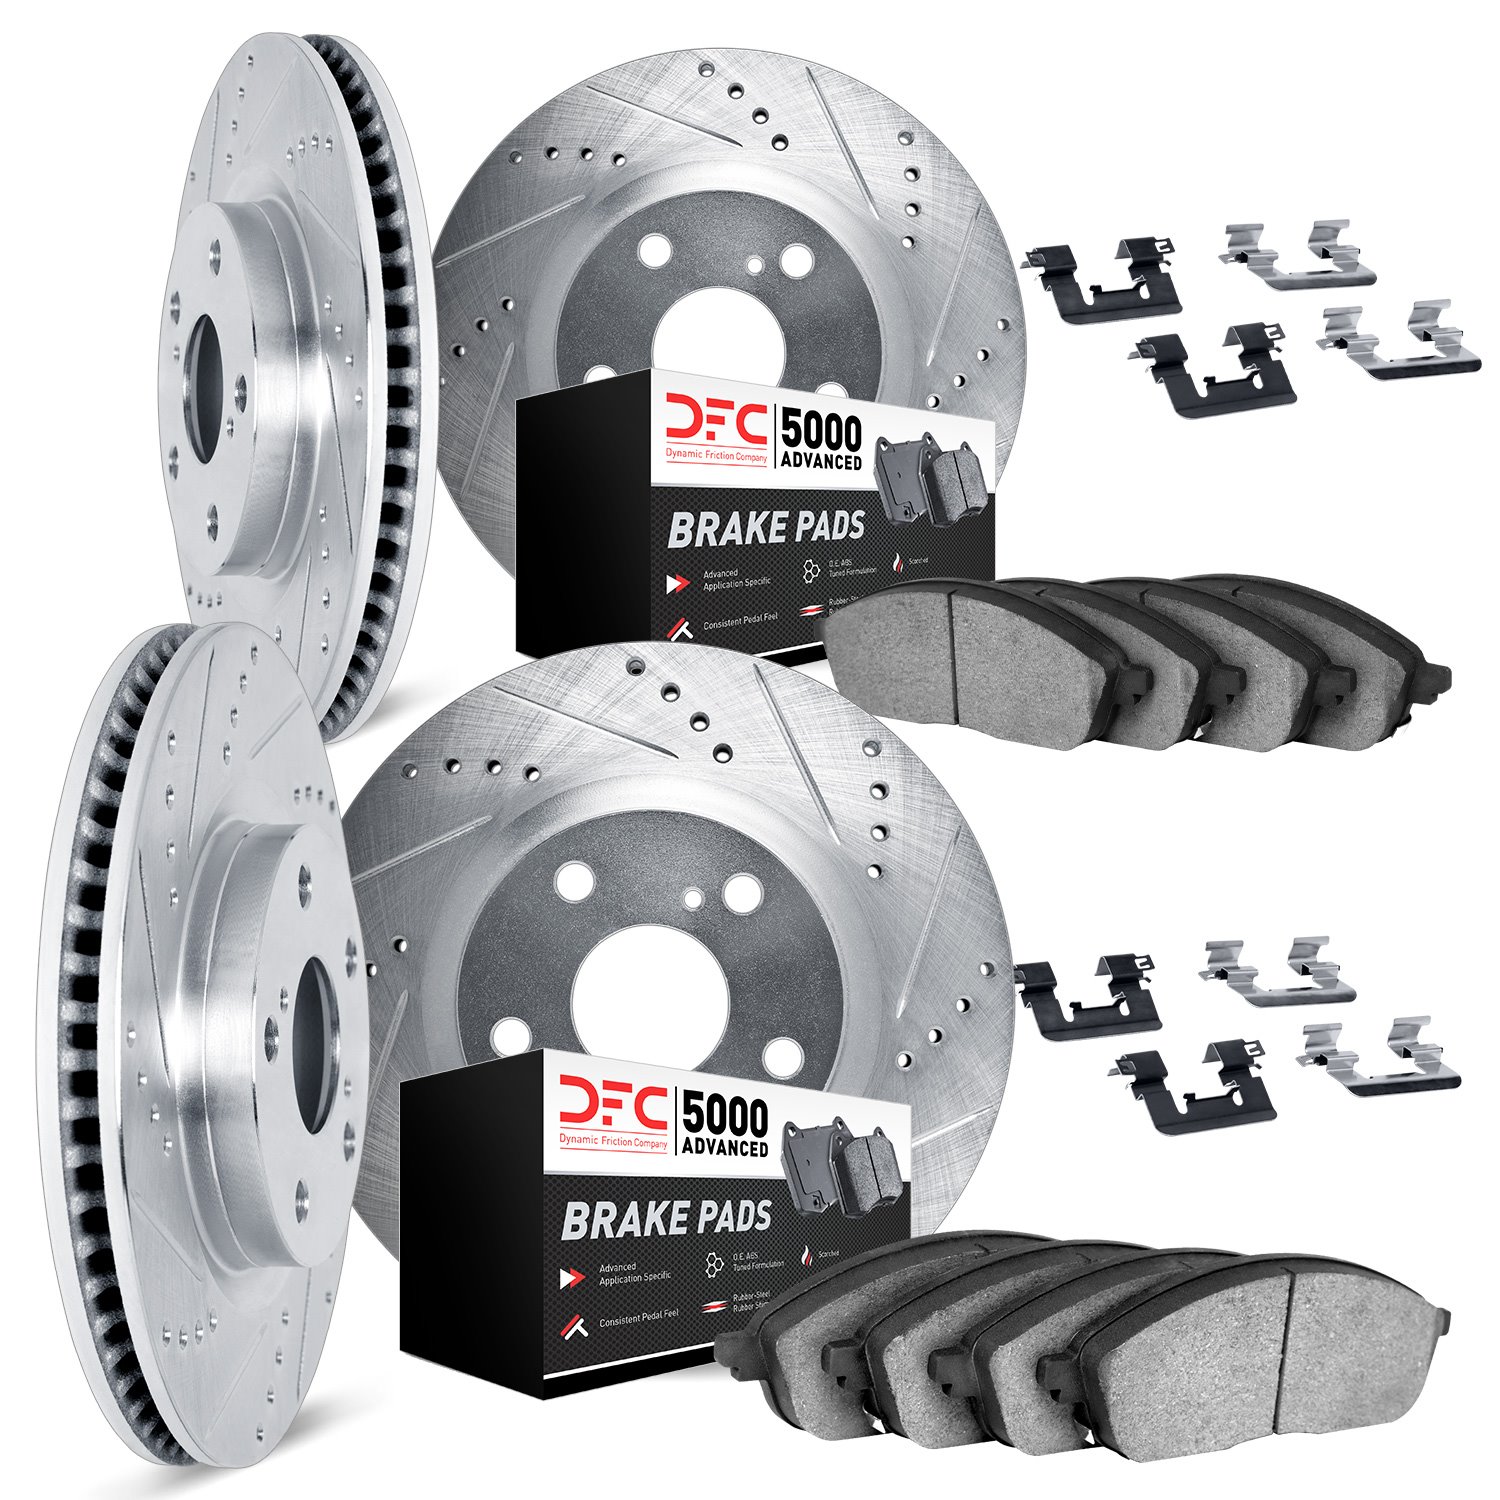 7514-42009 Drilled/Slotted Brake Rotors w/5000 Advanced Brake Pads Kit & Hardware [Silver], 2006-2010 Mopar, Position: Front and